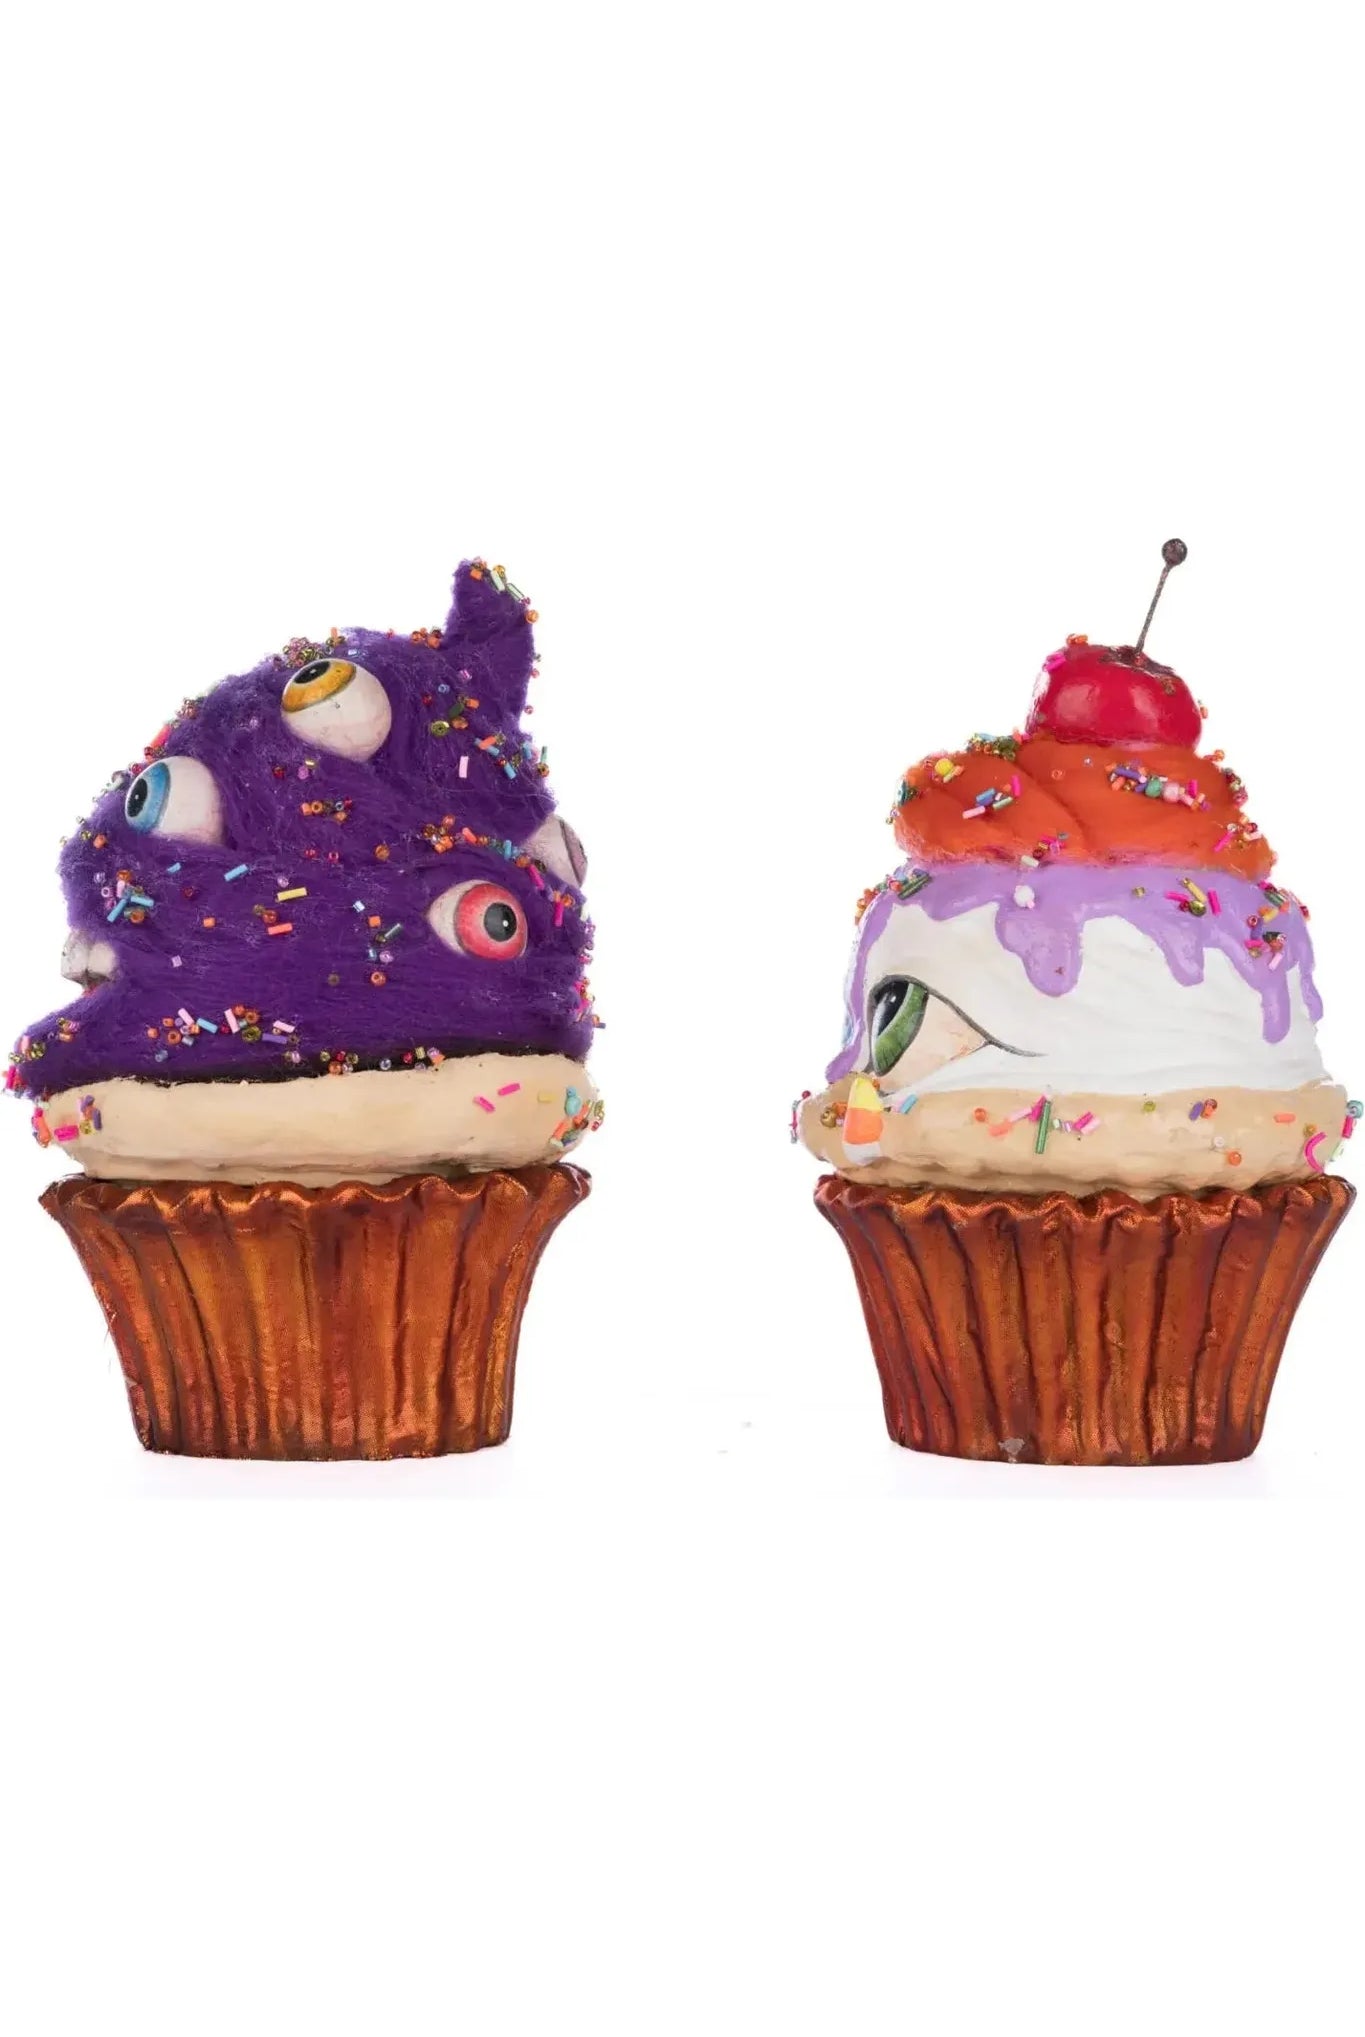 Shop For Creepy Cupcakes Crazy Eyes And Crabby Crumbs Assortment of 2 28-428534